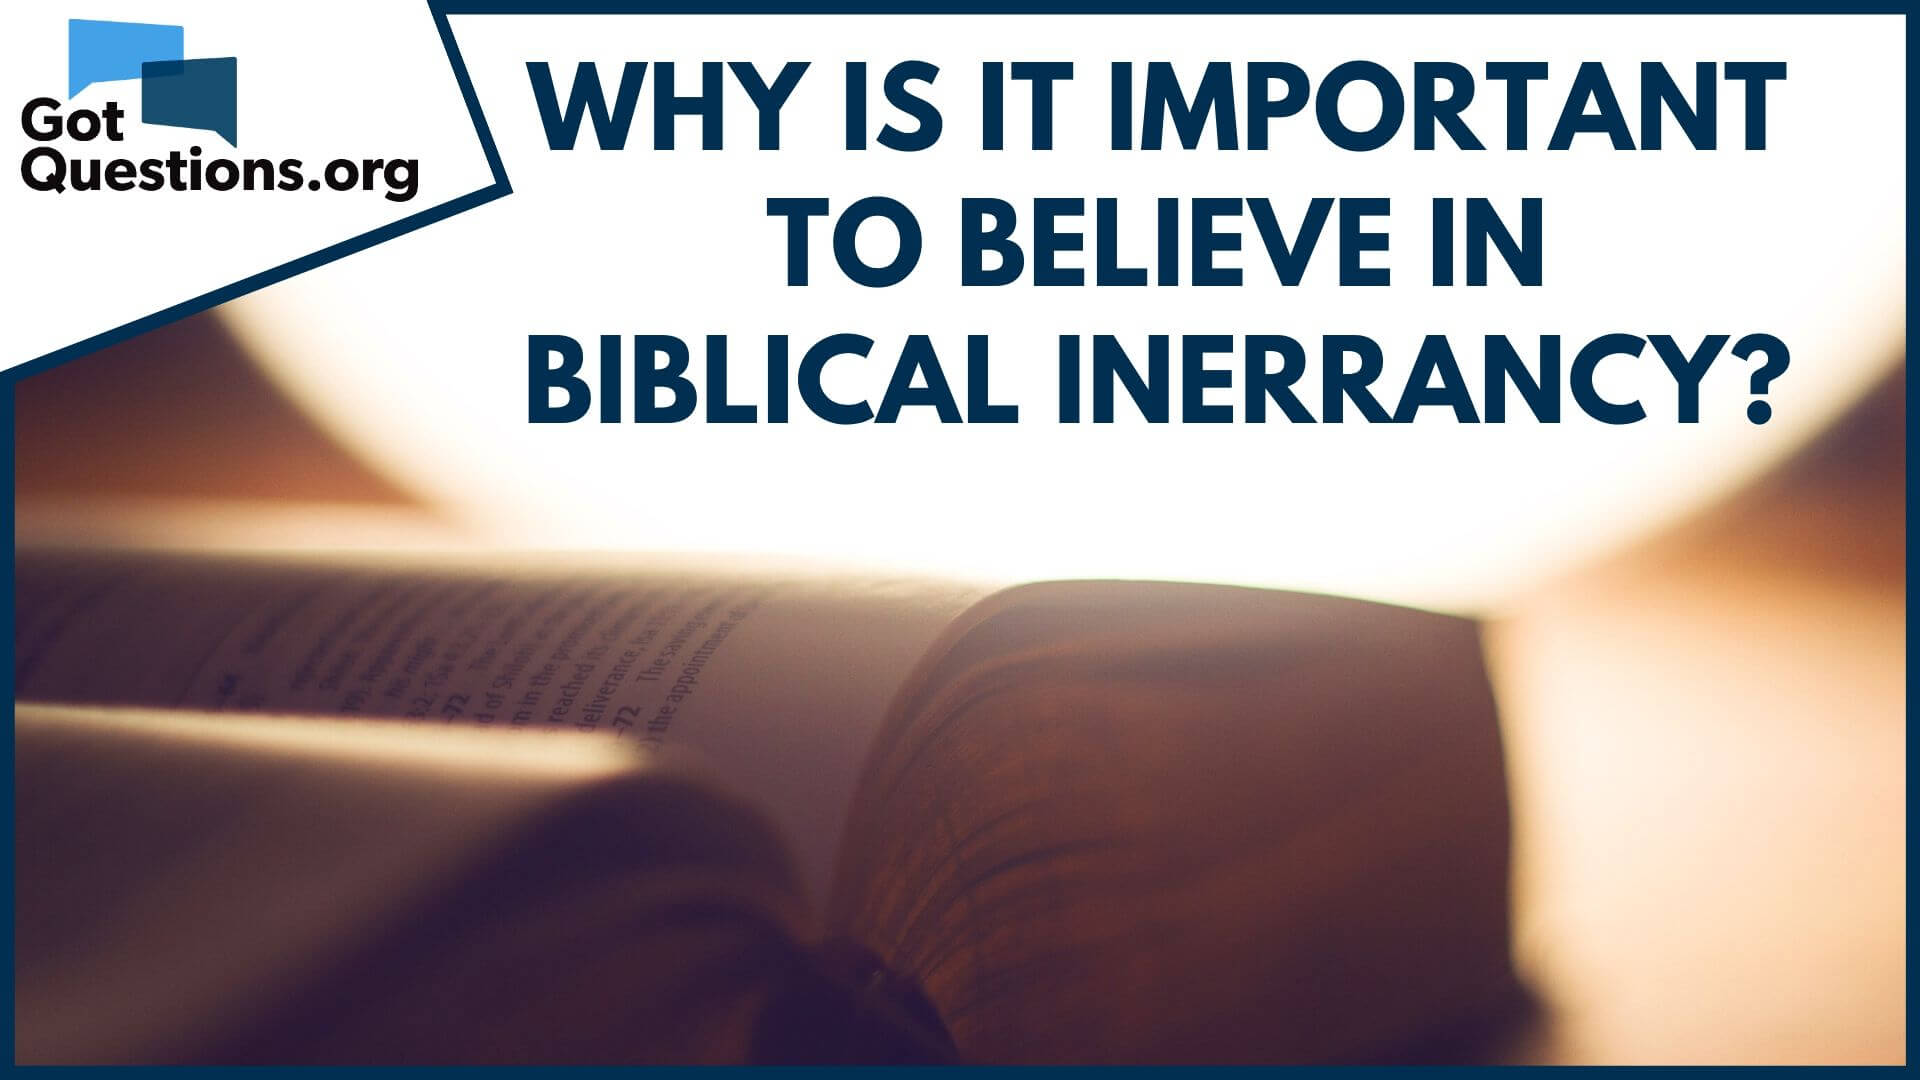 Why is it important to believe in biblical inerrancy? | GotQuestions.org